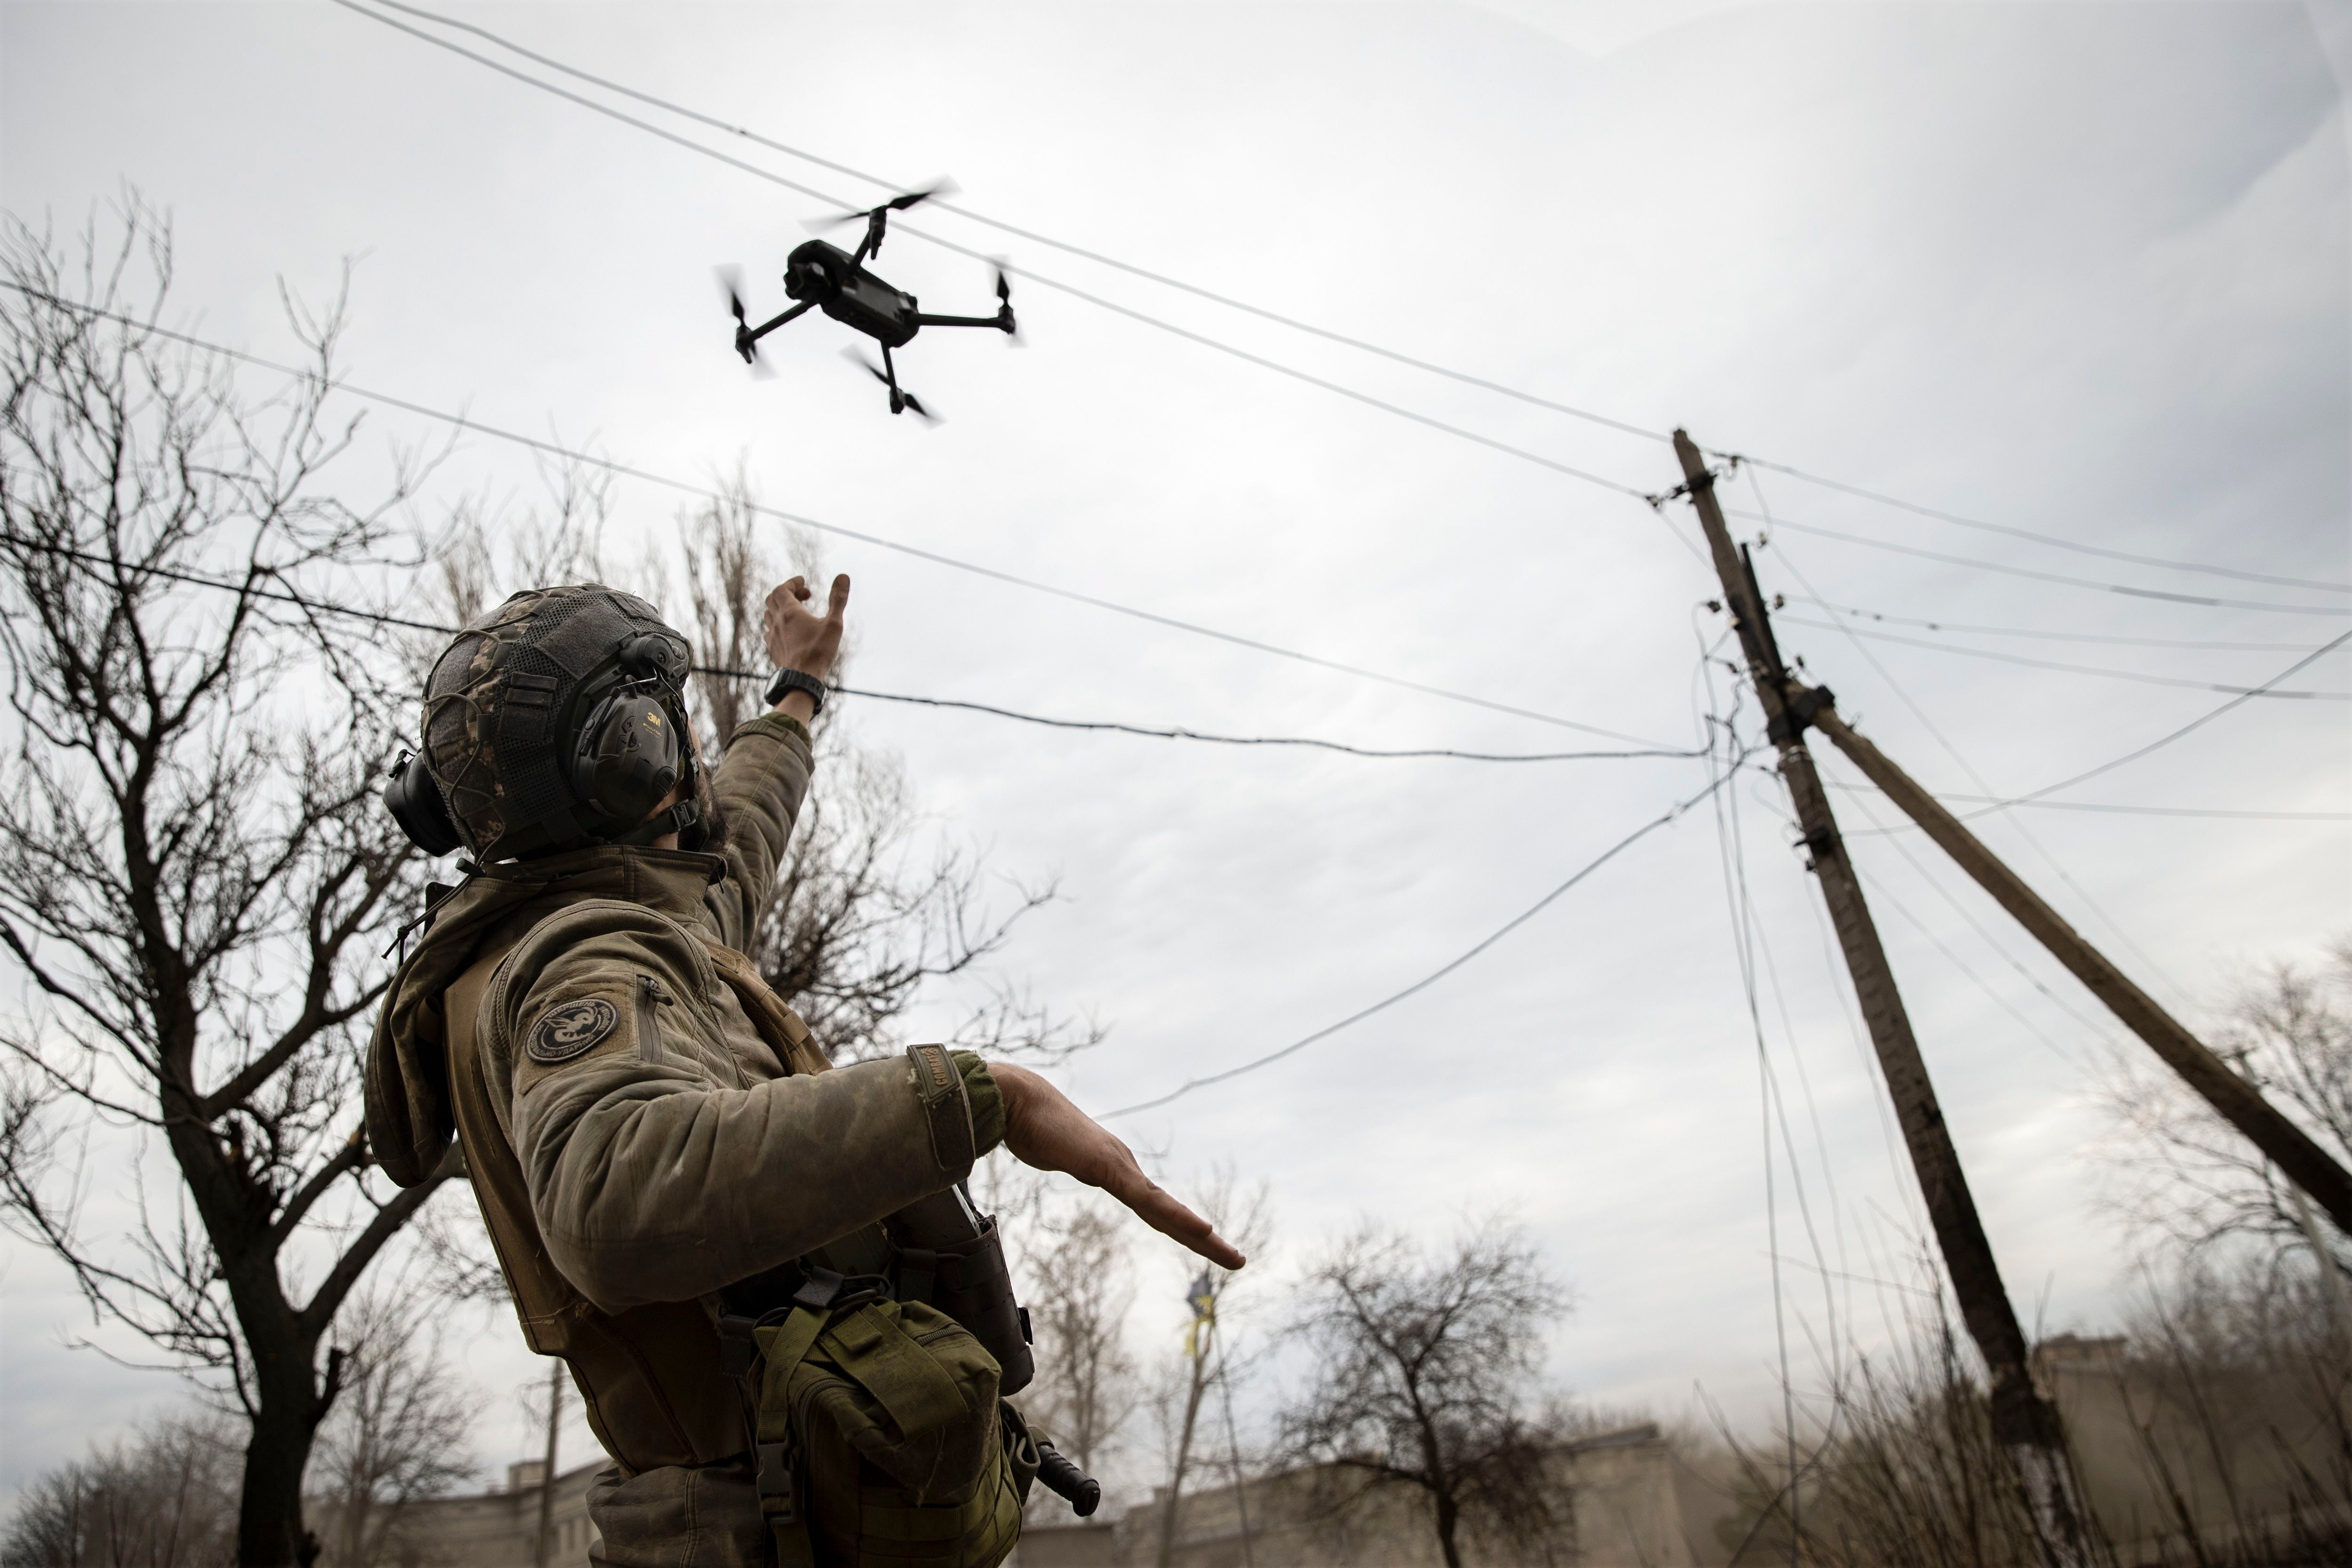 (Tyler Hicks | The New York Times) A Ukrainian soldier operates a DJI drone on the front line of the war, in the Donetsk region of eastern Ukraine on March 15, 2023. U.S. authorities consider Chinese drone maker DJI a security threat; Congress is weighing legislation to ban it, prompting a lobbying campaign from the company, which dominates the commercial and consumer drone markets.